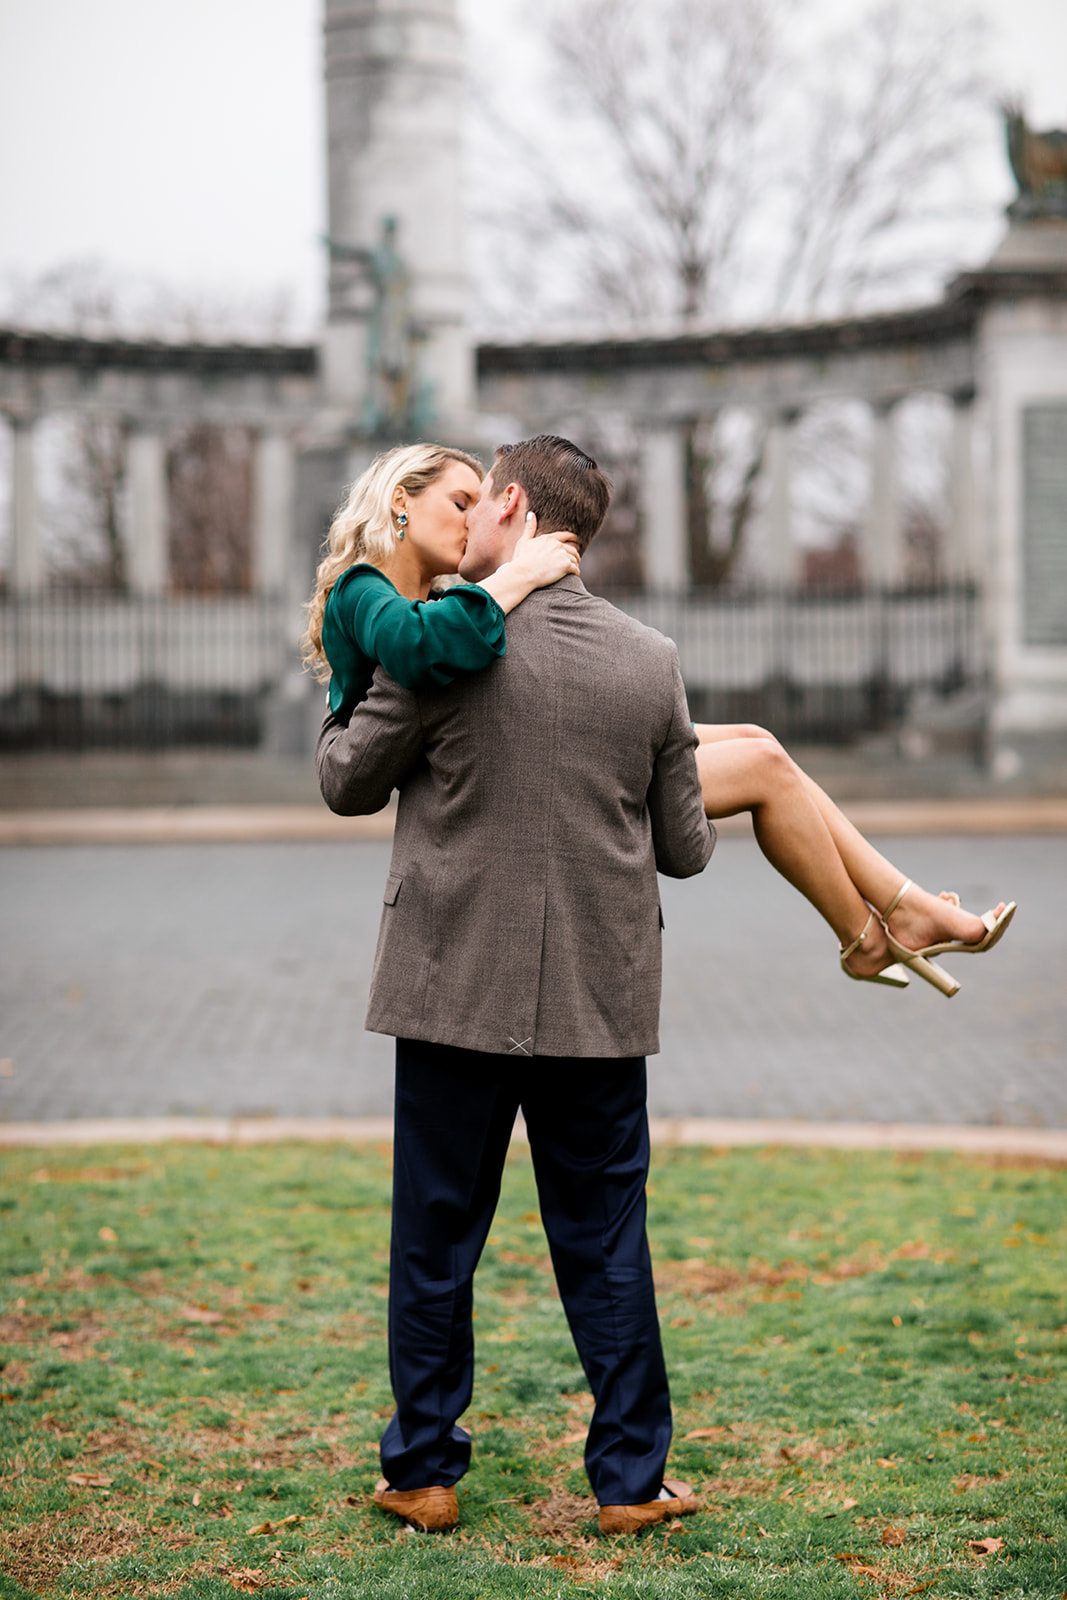 Michelle  Brendans Tobacco Company and Monument Ave Engagement Shoot - Image Property of www.j-dphoto.com